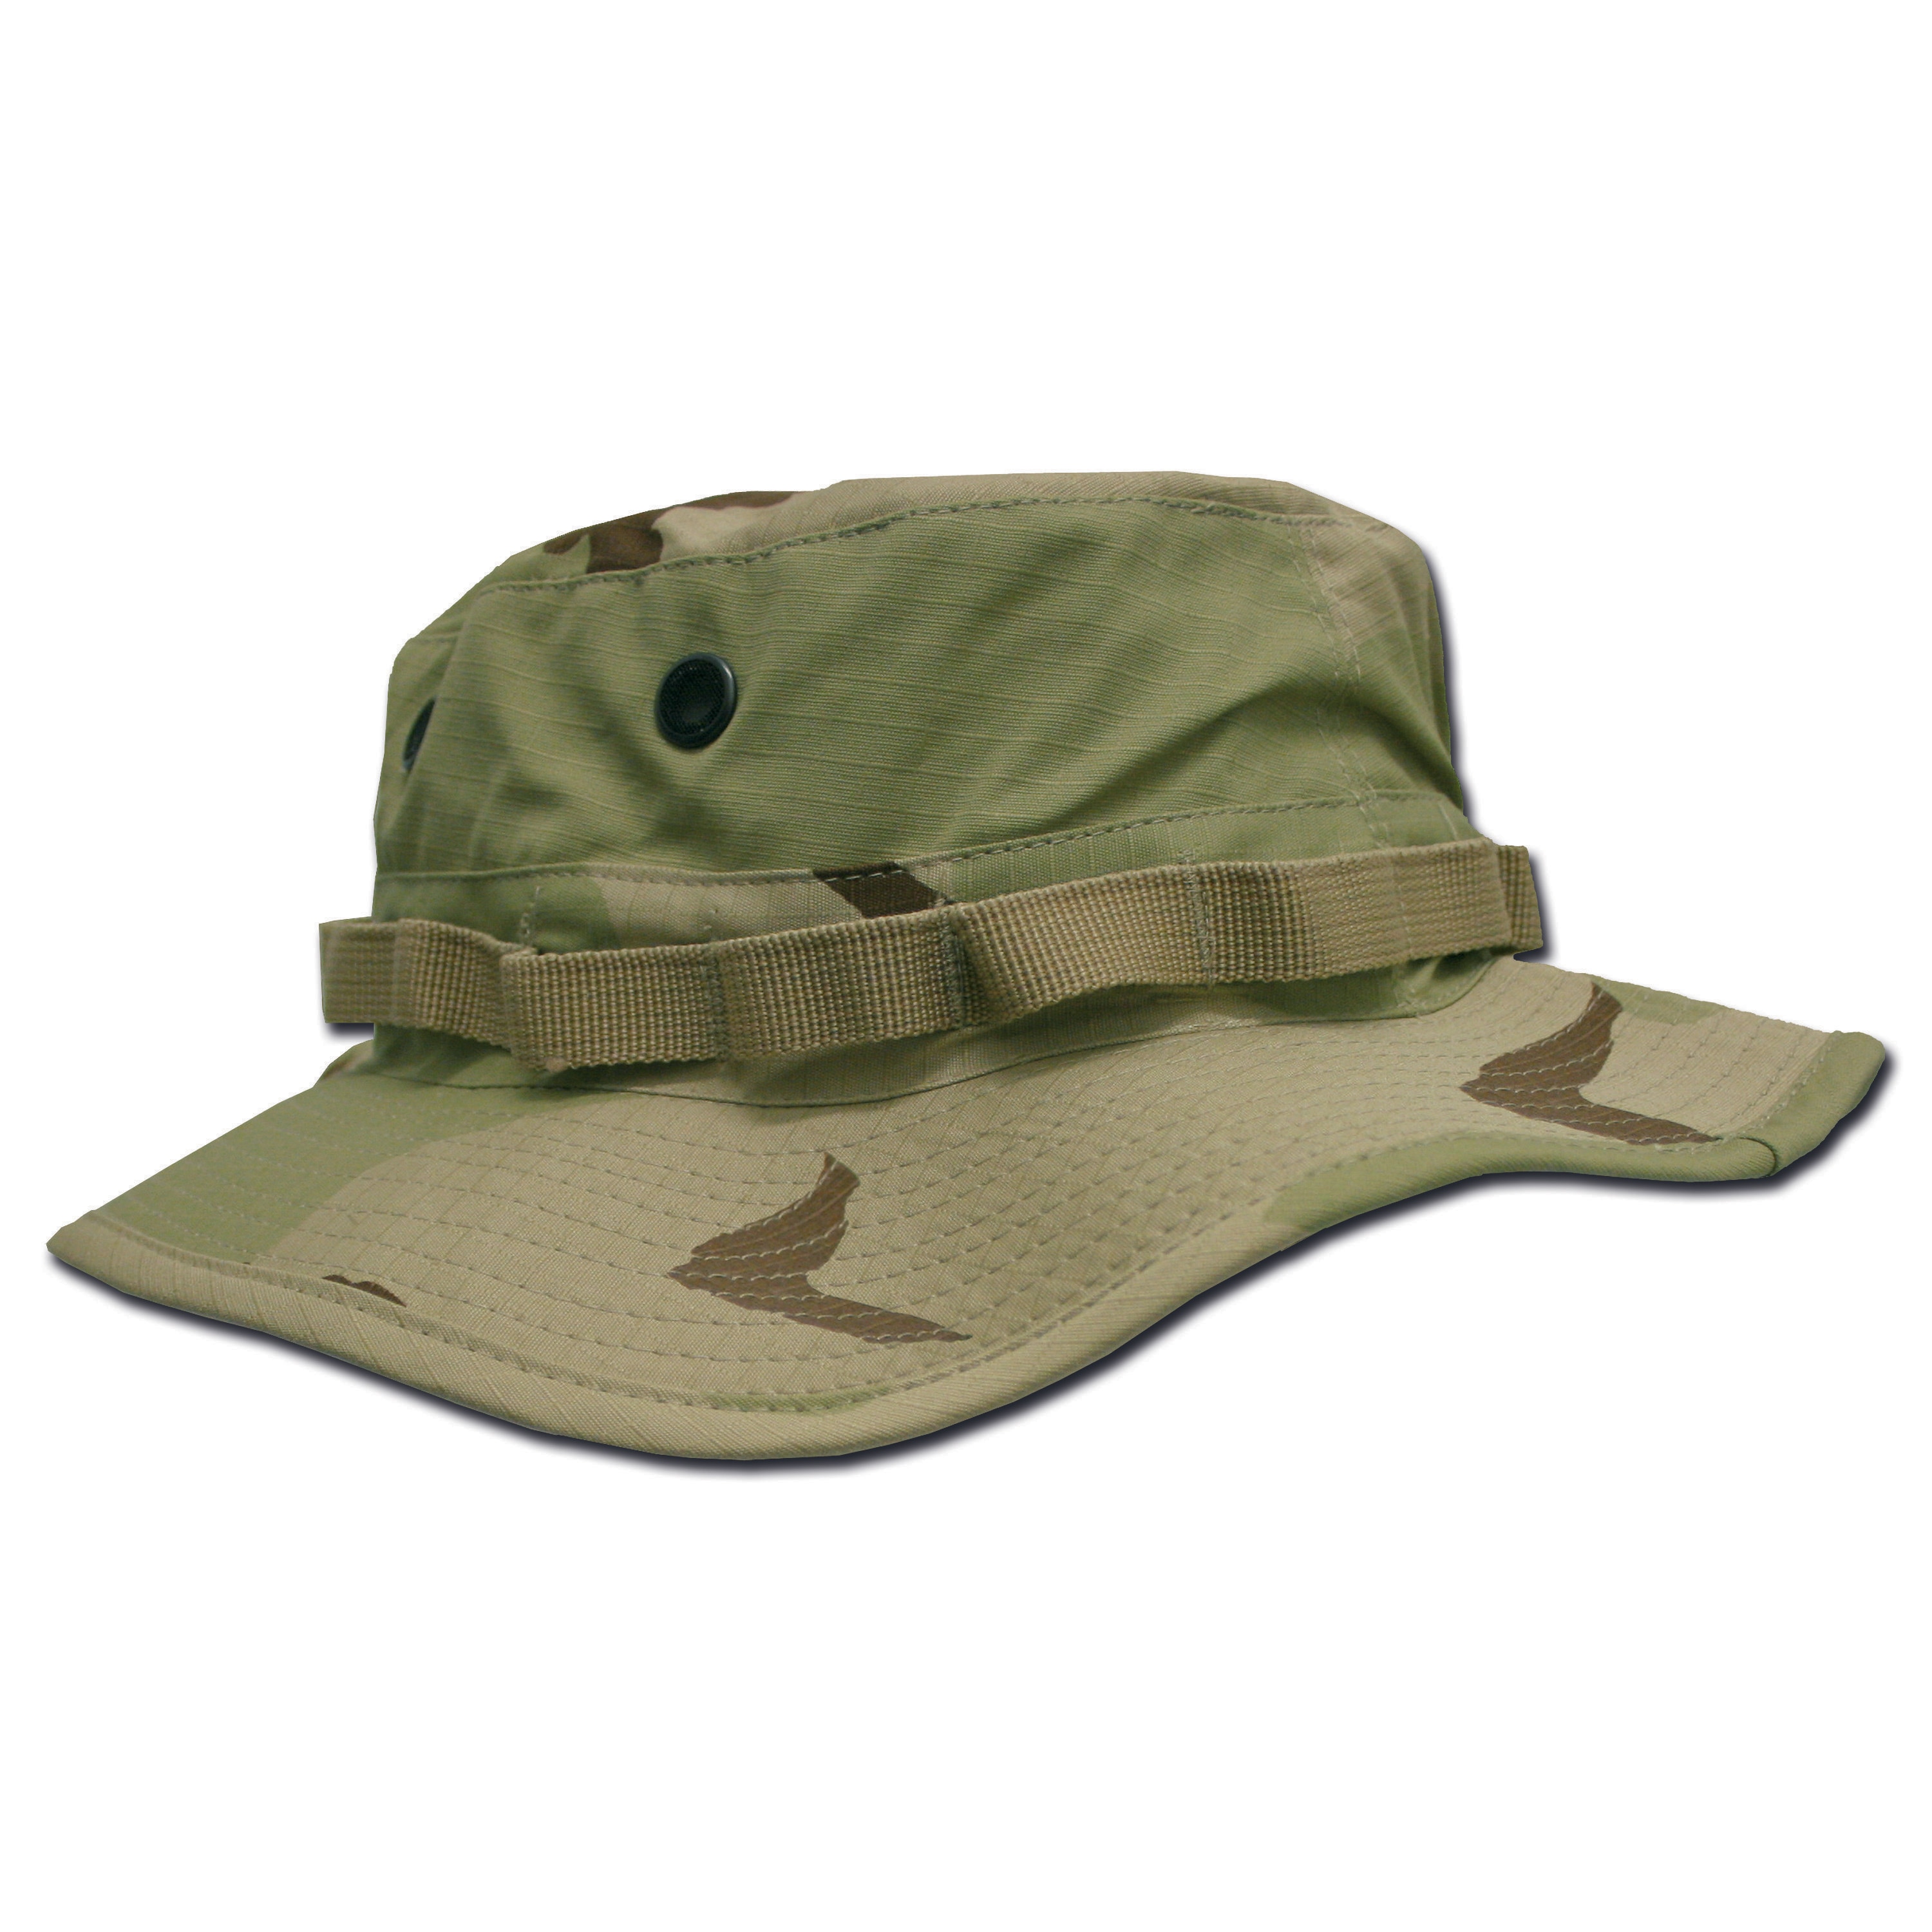 Boonie Style Hat desert-3 color | Boonie Style Hat desert-3 color ...